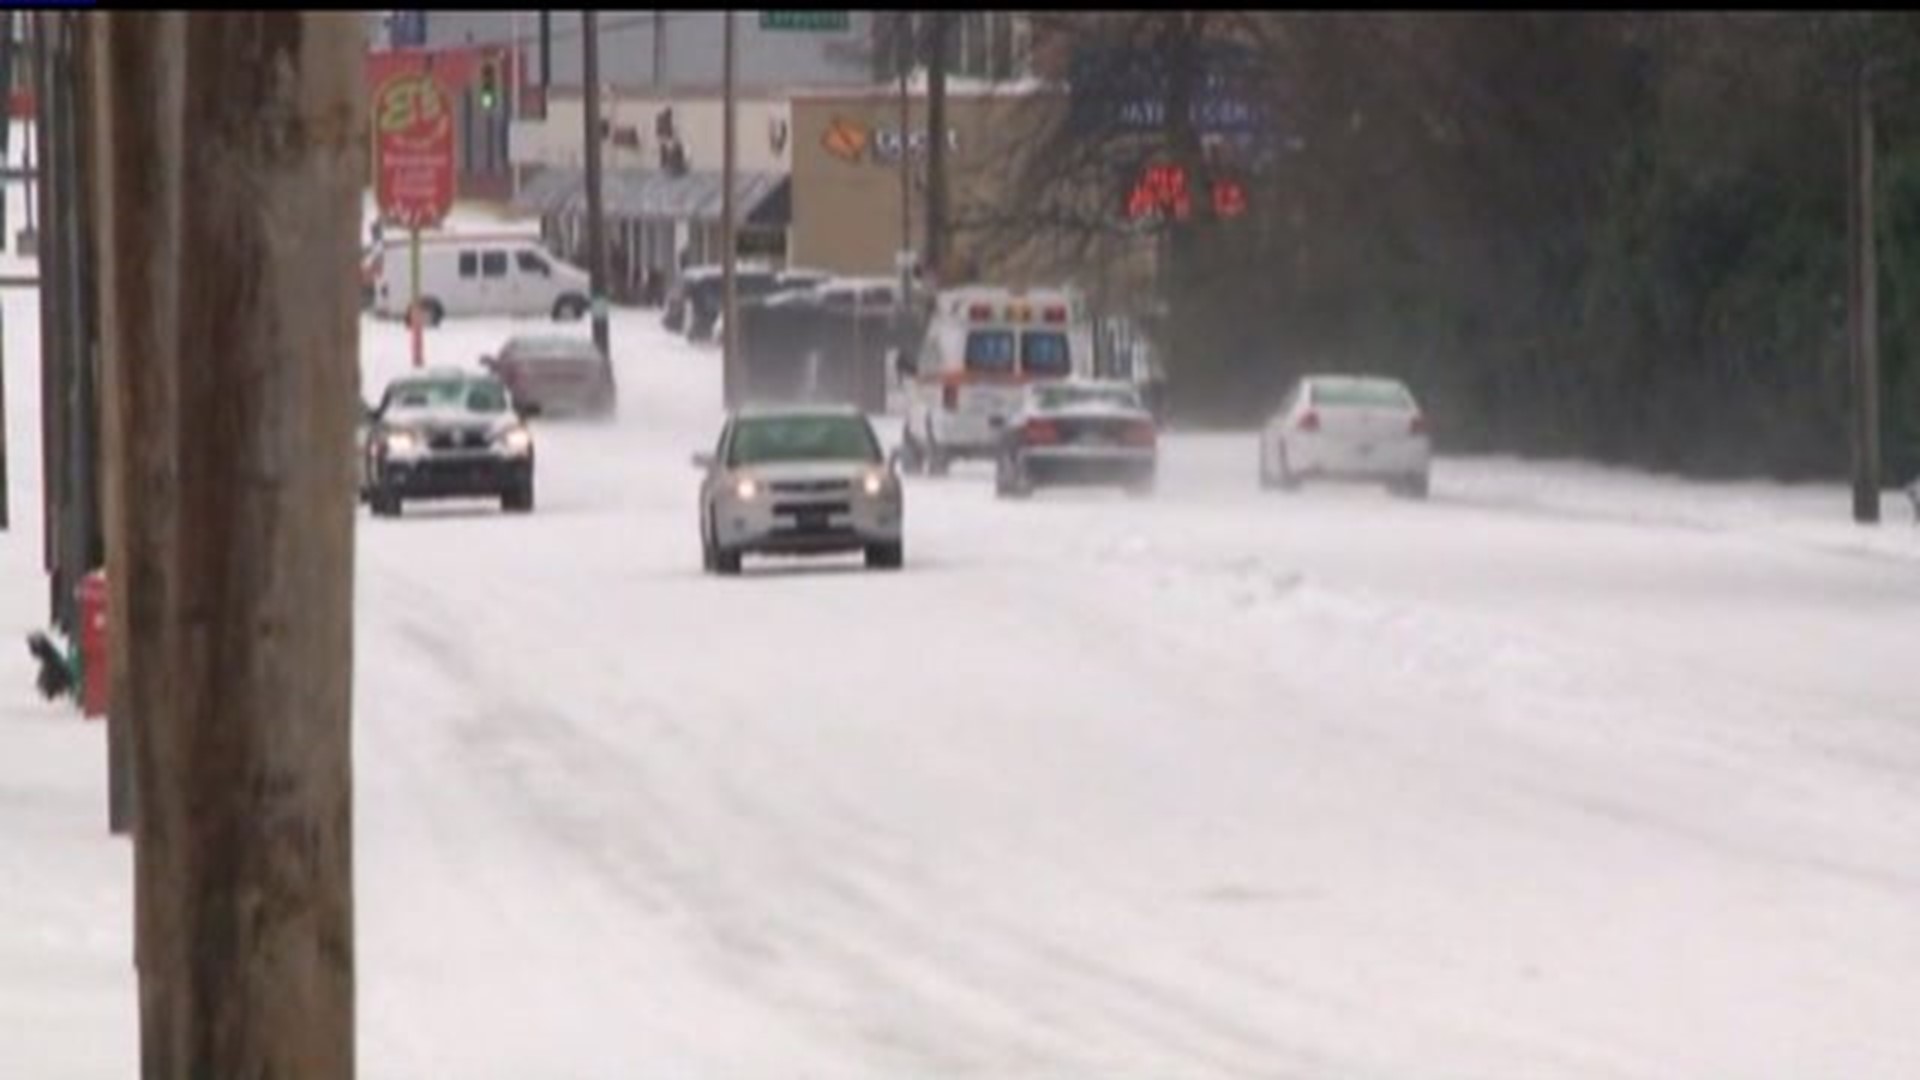 New bill could penalize drivers over flying ice and snow